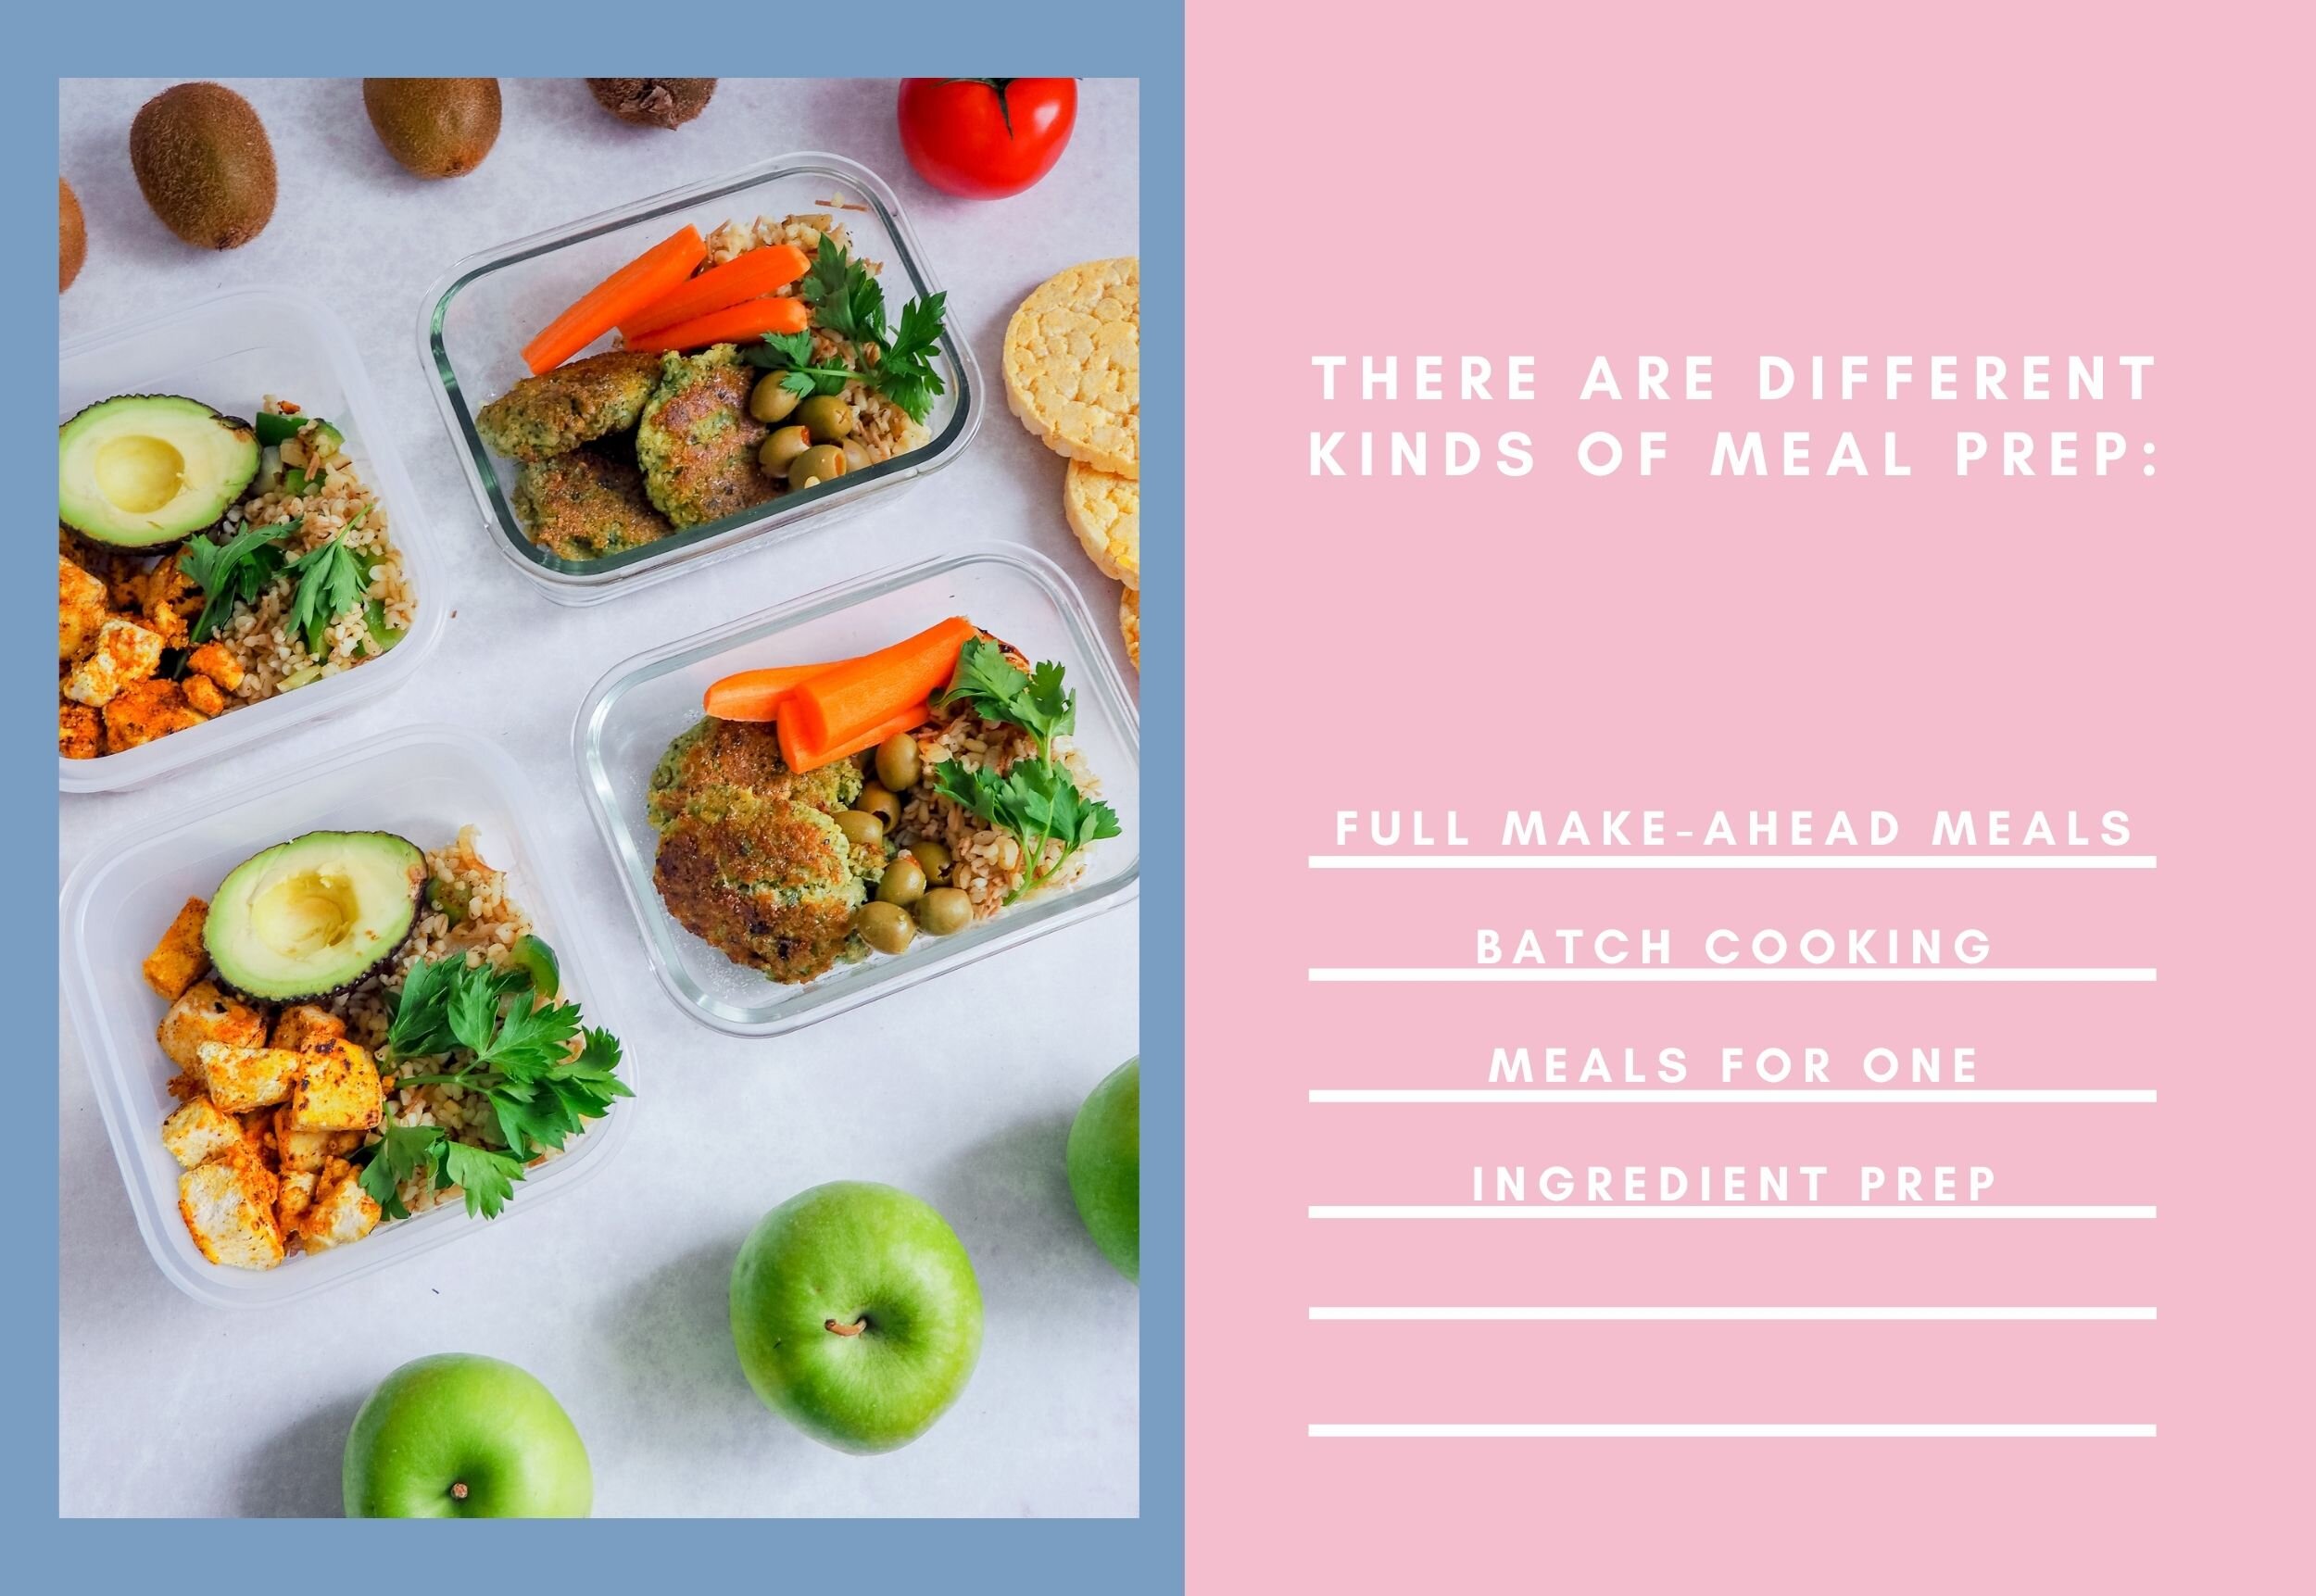 Meal Prep Vs. Batch Cooking: What's The Difference?